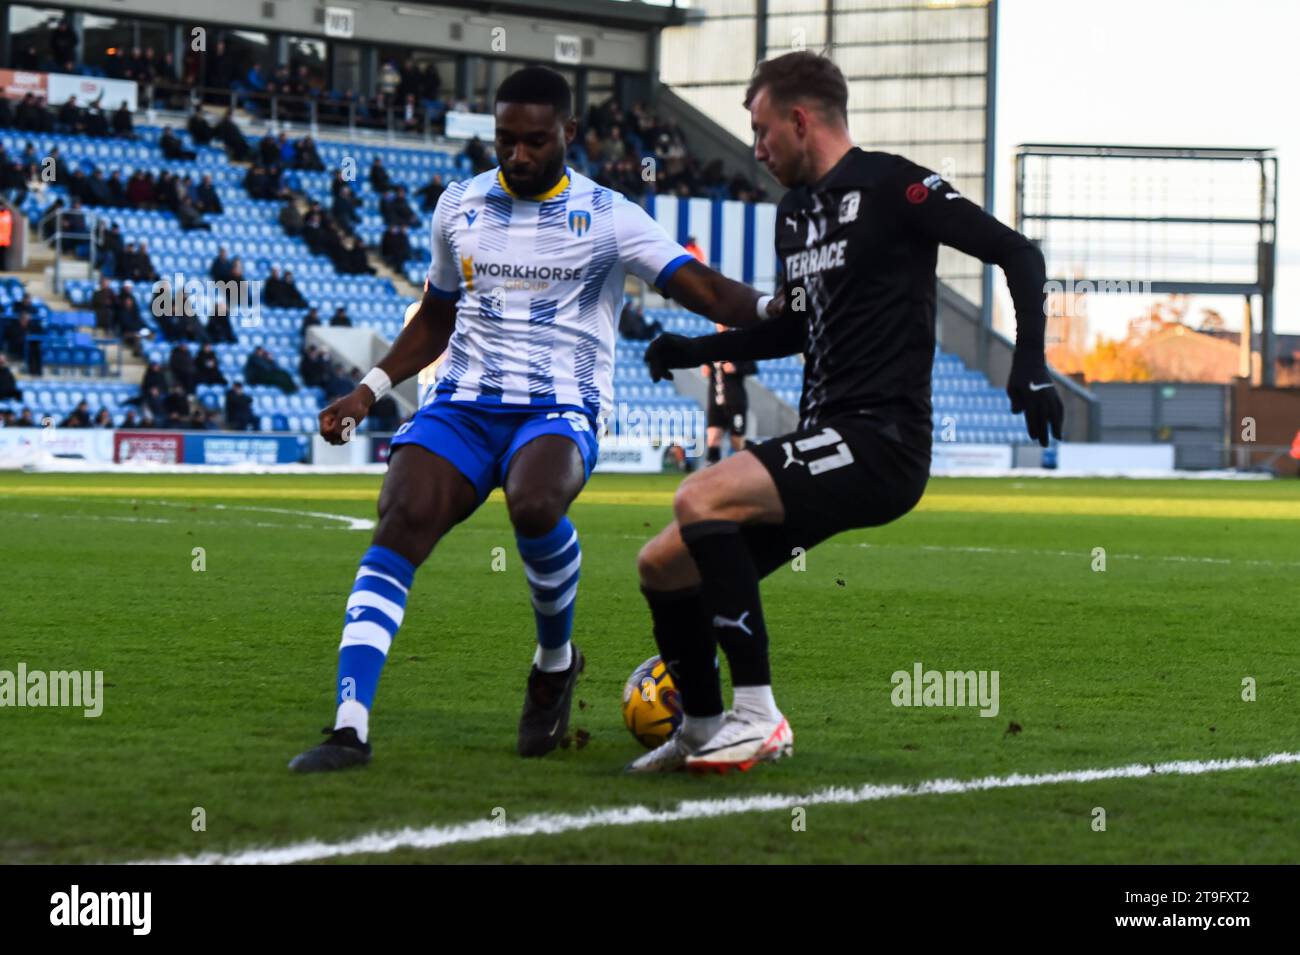 Mandela Egbo (18 Colchester United) and Elliot Newby (11 Barrow) challenge for the ball during the Sky Bet League 2 match between Colchester United and Barrow at the Weston Homes Community Stadium, Colchester on Saturday 25th November 2023. (Photo: Kevin Hodgson | MI News) Credit: MI News & Sport /Alamy Live News Stock Photo